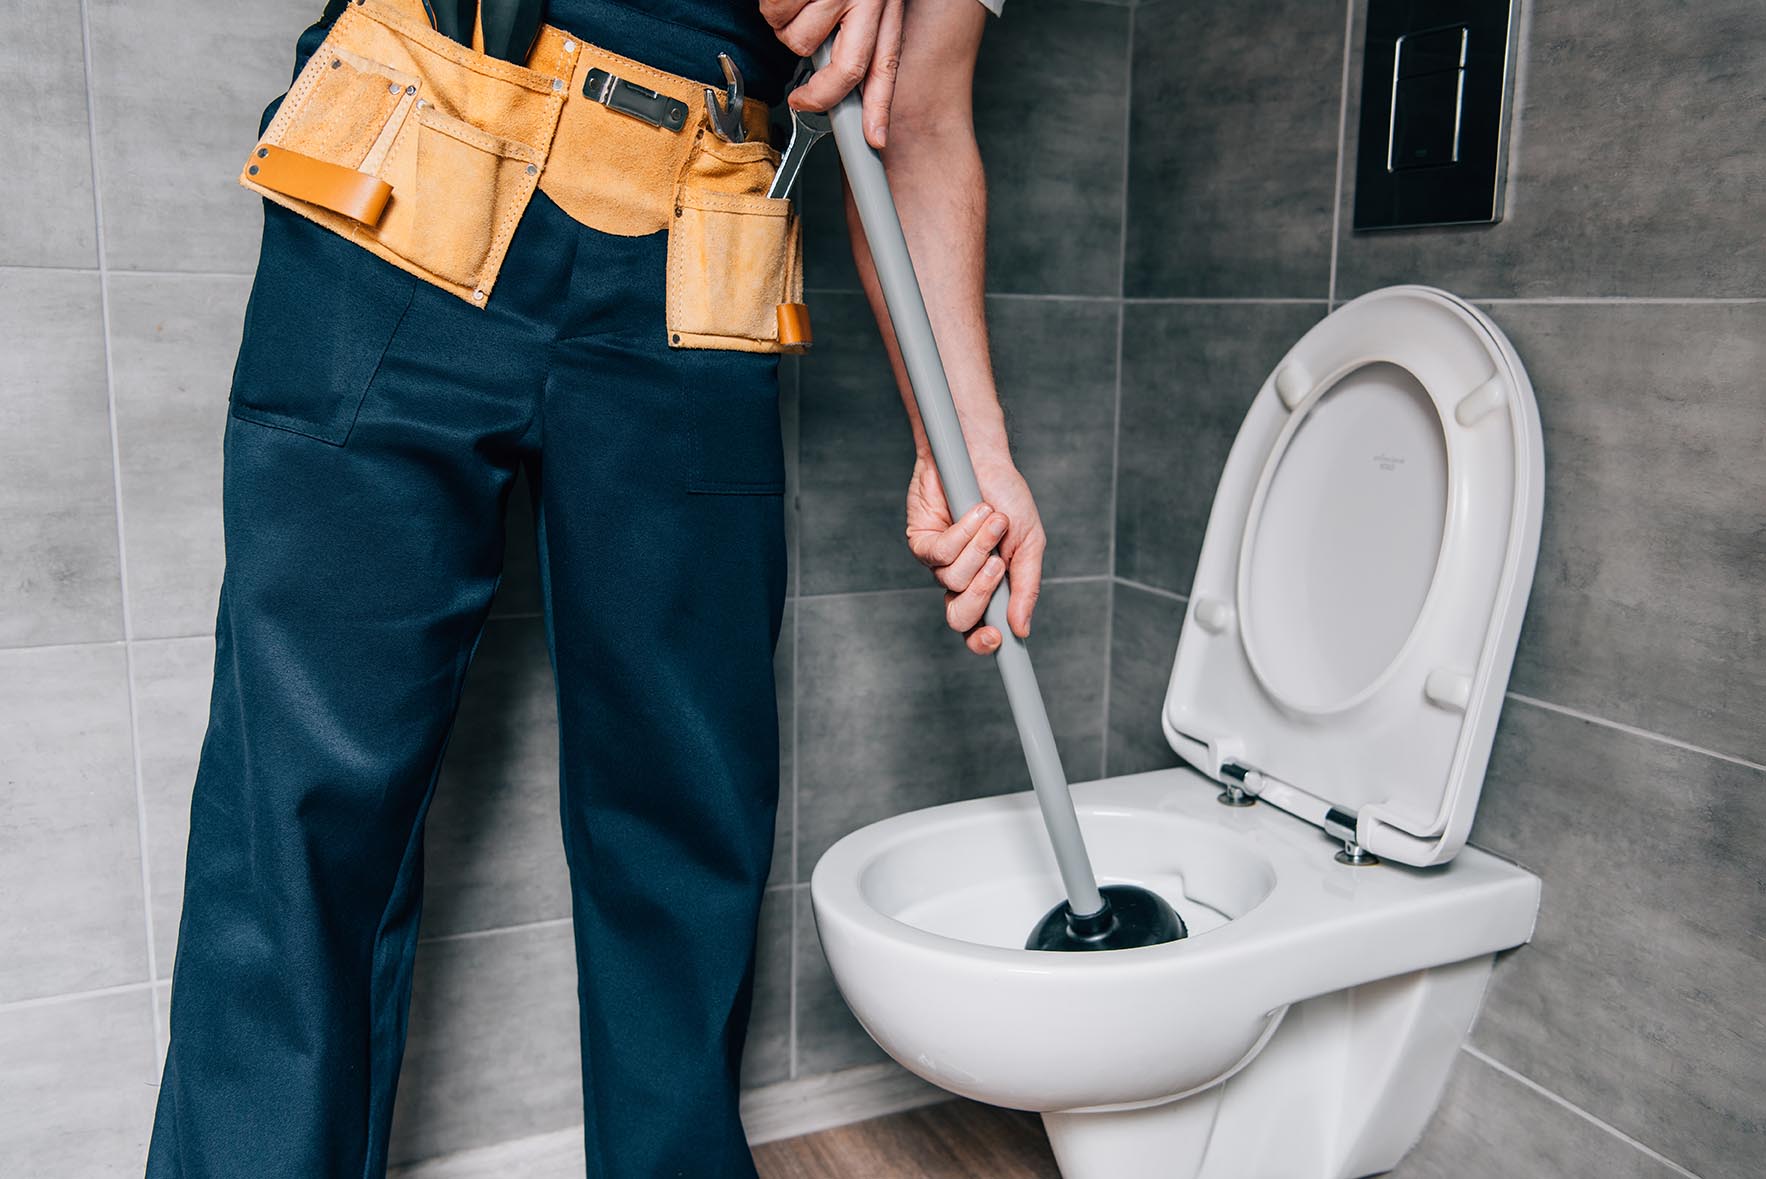 Plumbers in Melbourne Area